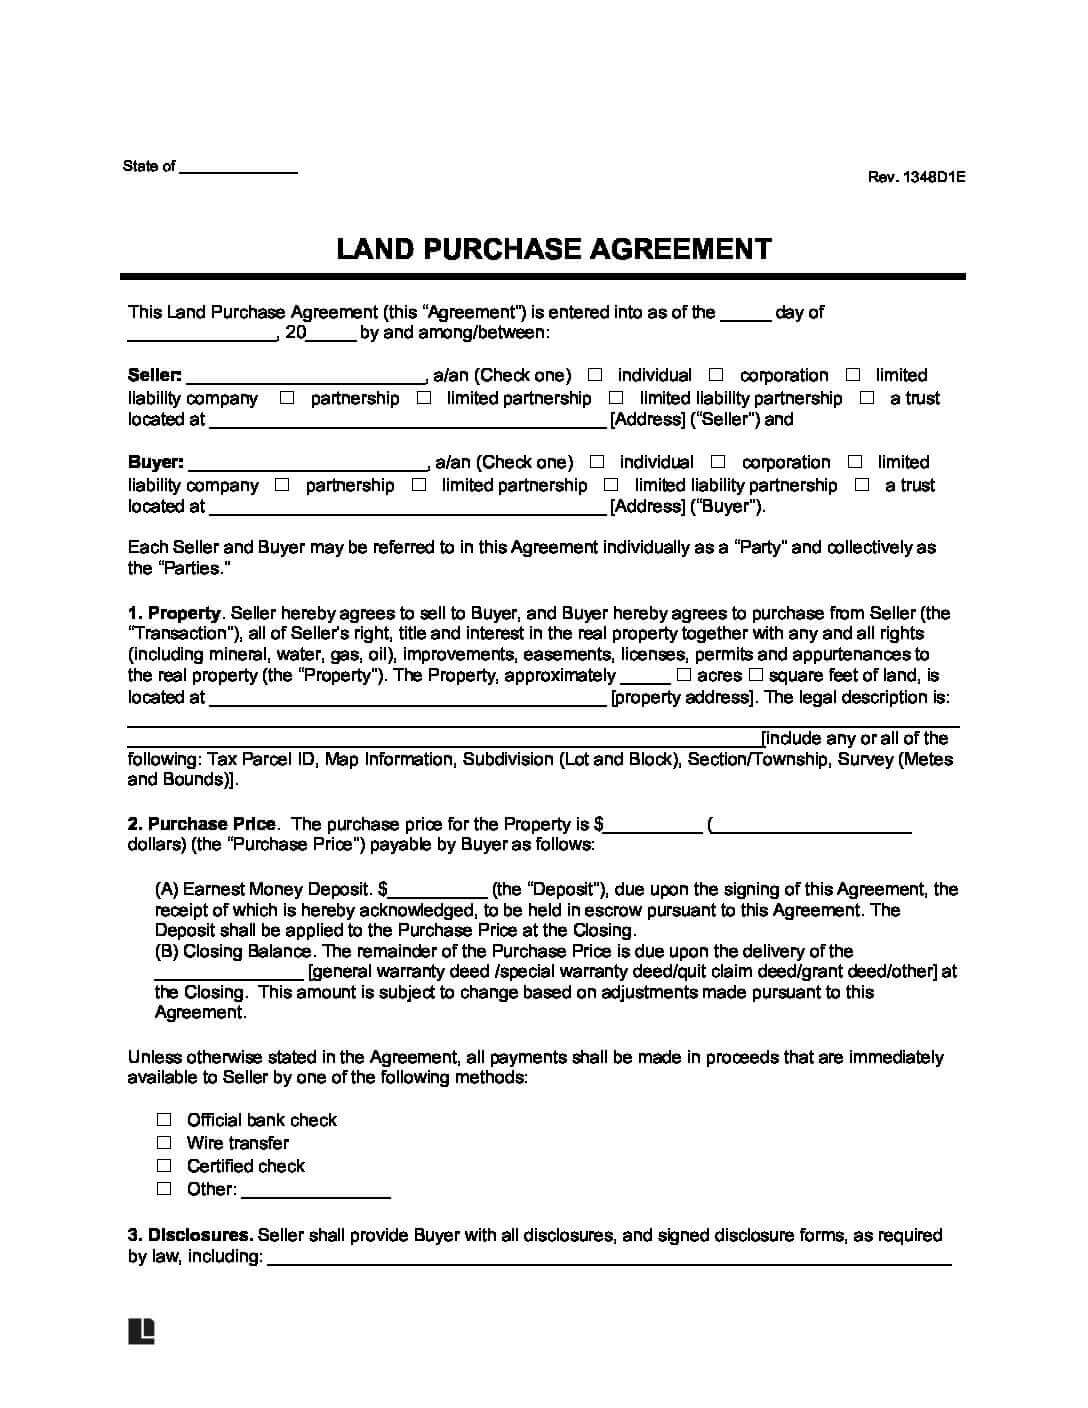 land purchase agreement template